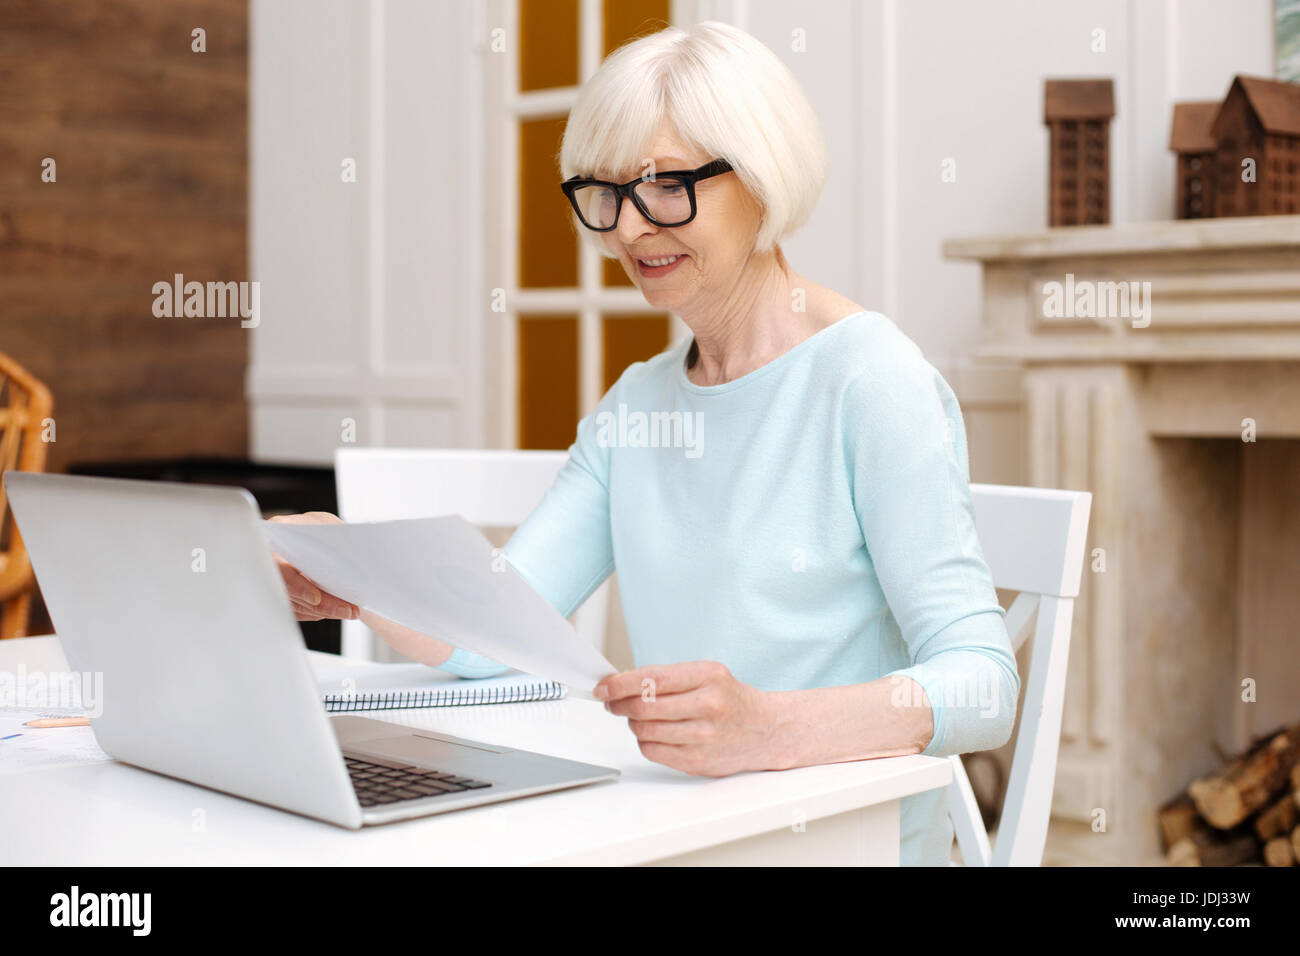 Committed professional lady perusing a report Stock Photo